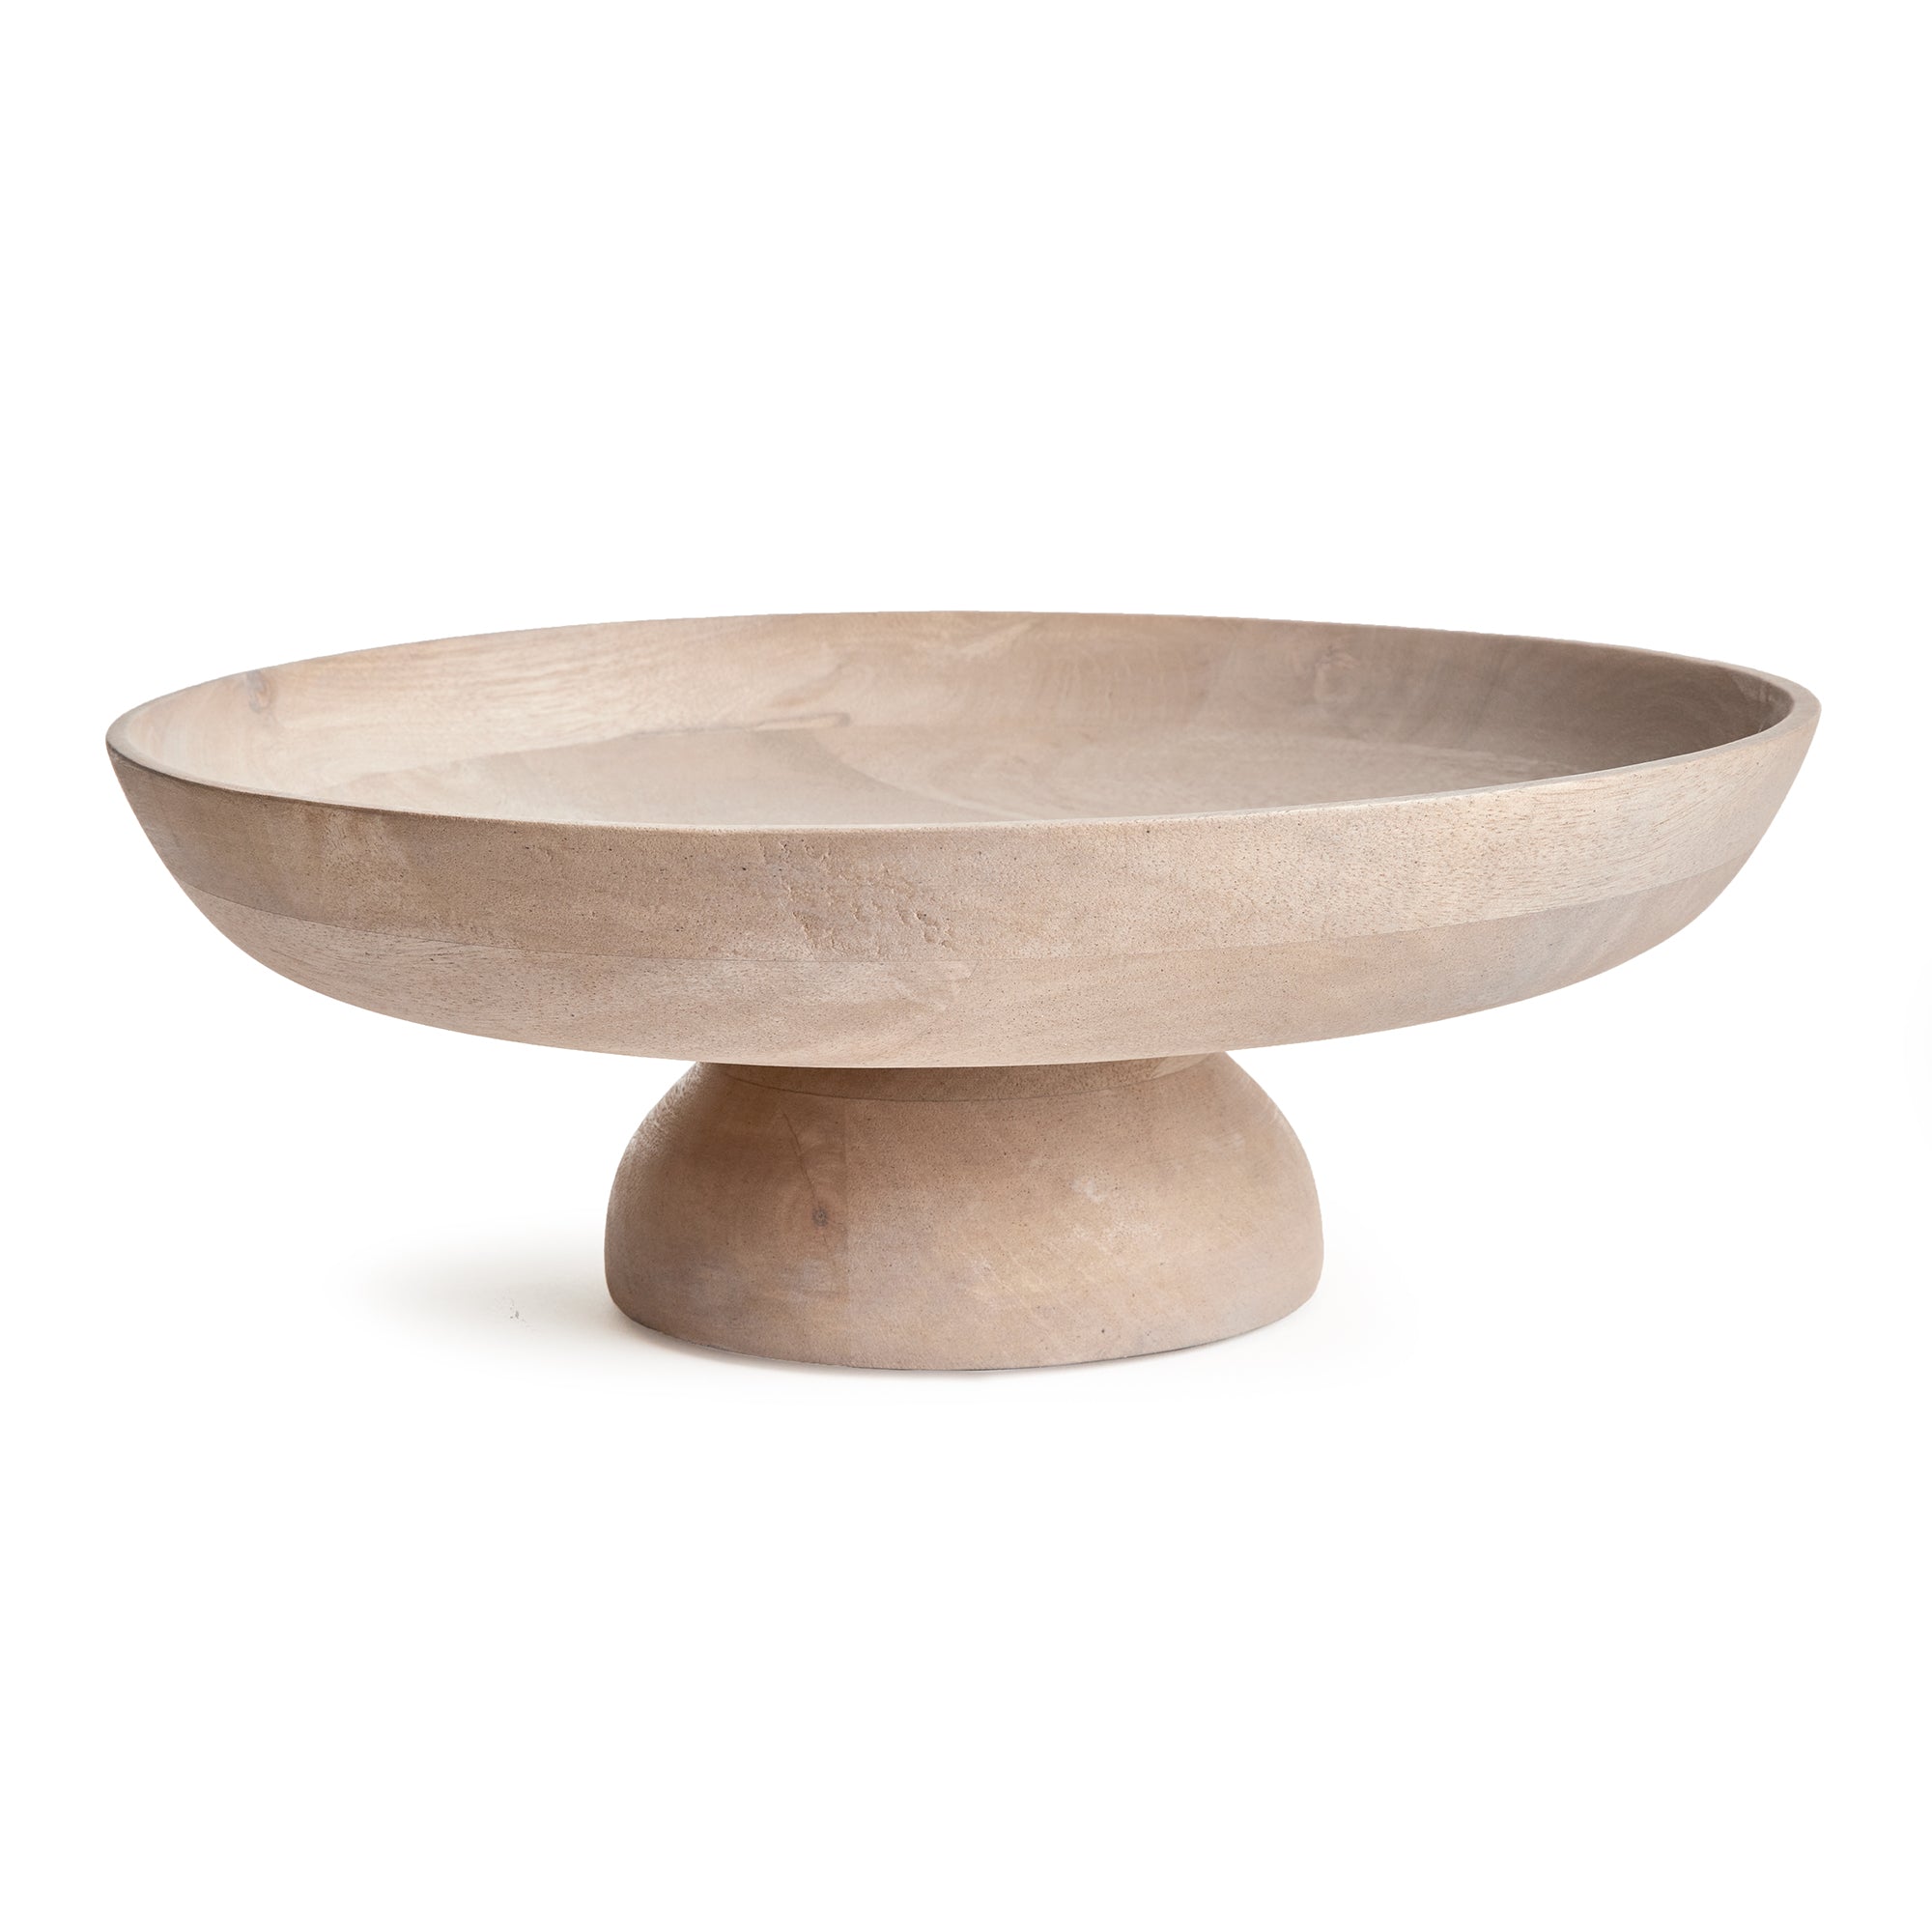 Contemporary and uniquely designed, this footed bowl is made of mango wood. Makes a beautiful serving bowl for dry foods, as well as a gorgeous centerpiece all on its own. Amethyst Home provides interior design, new construction, custom furniture, and area rugs in the Winter Garden metro area.